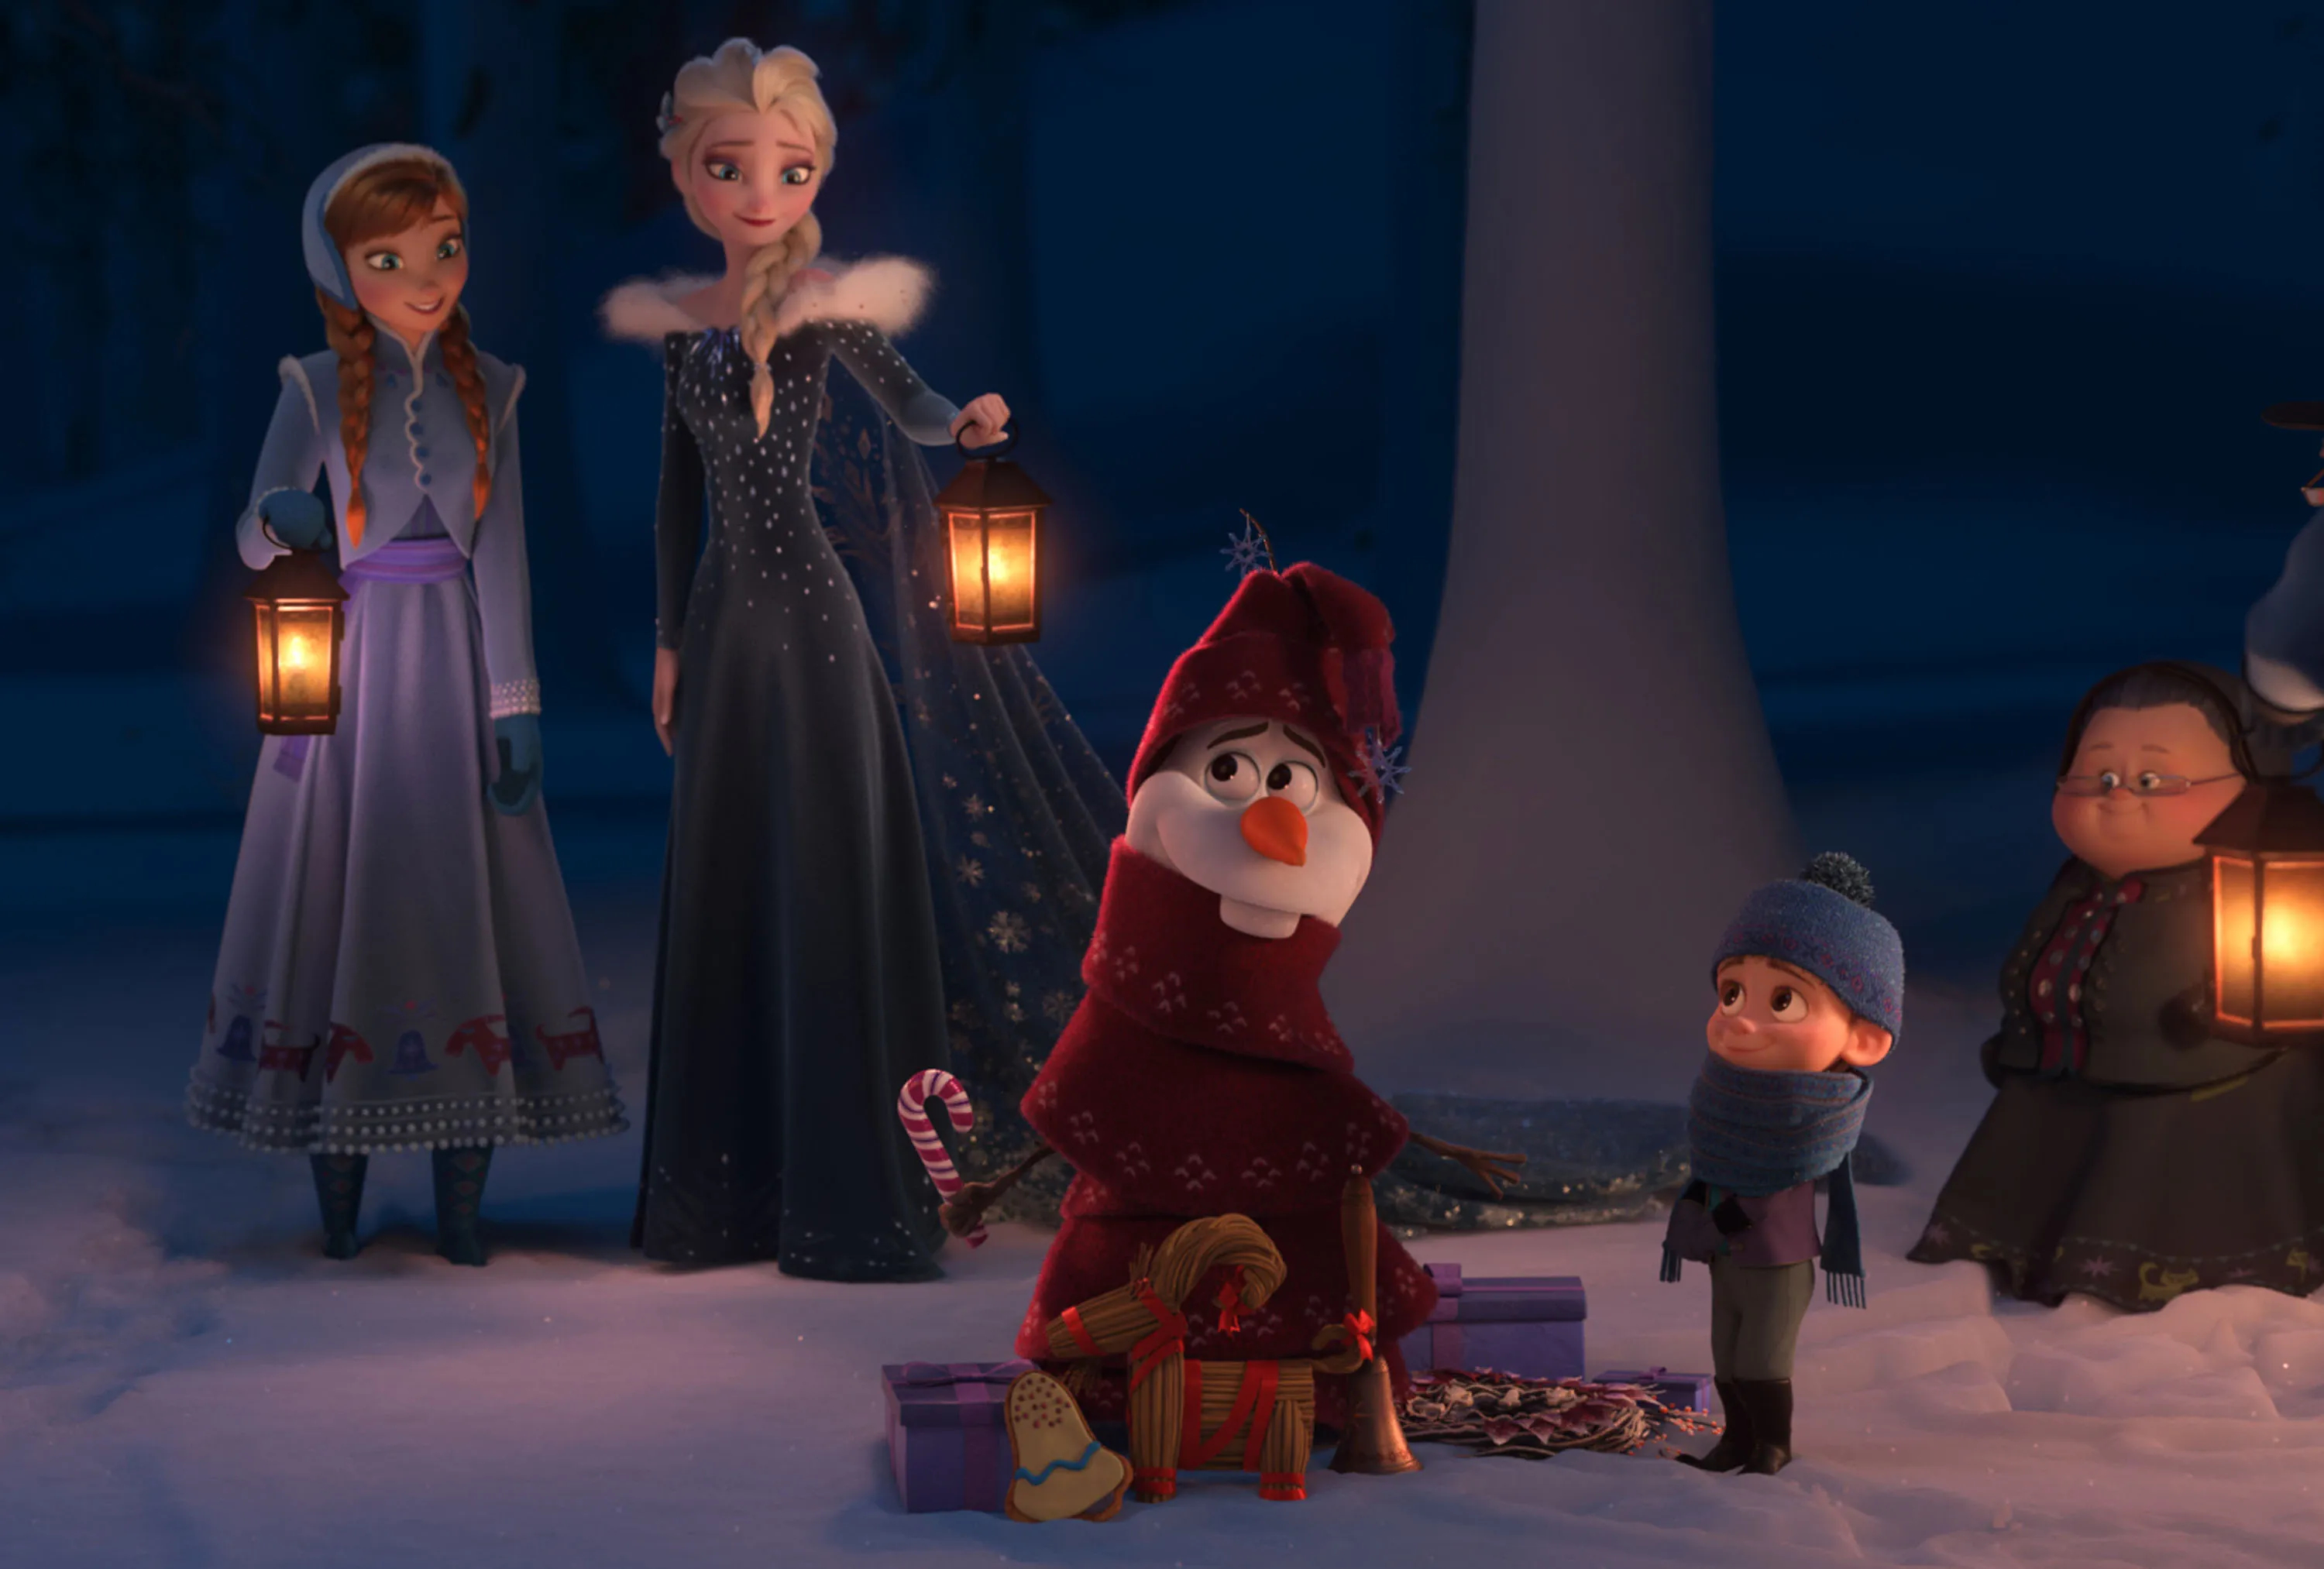 3000x2026 Olaf's Frozen Adventure' Is An Abomination The Life and Times of David Che